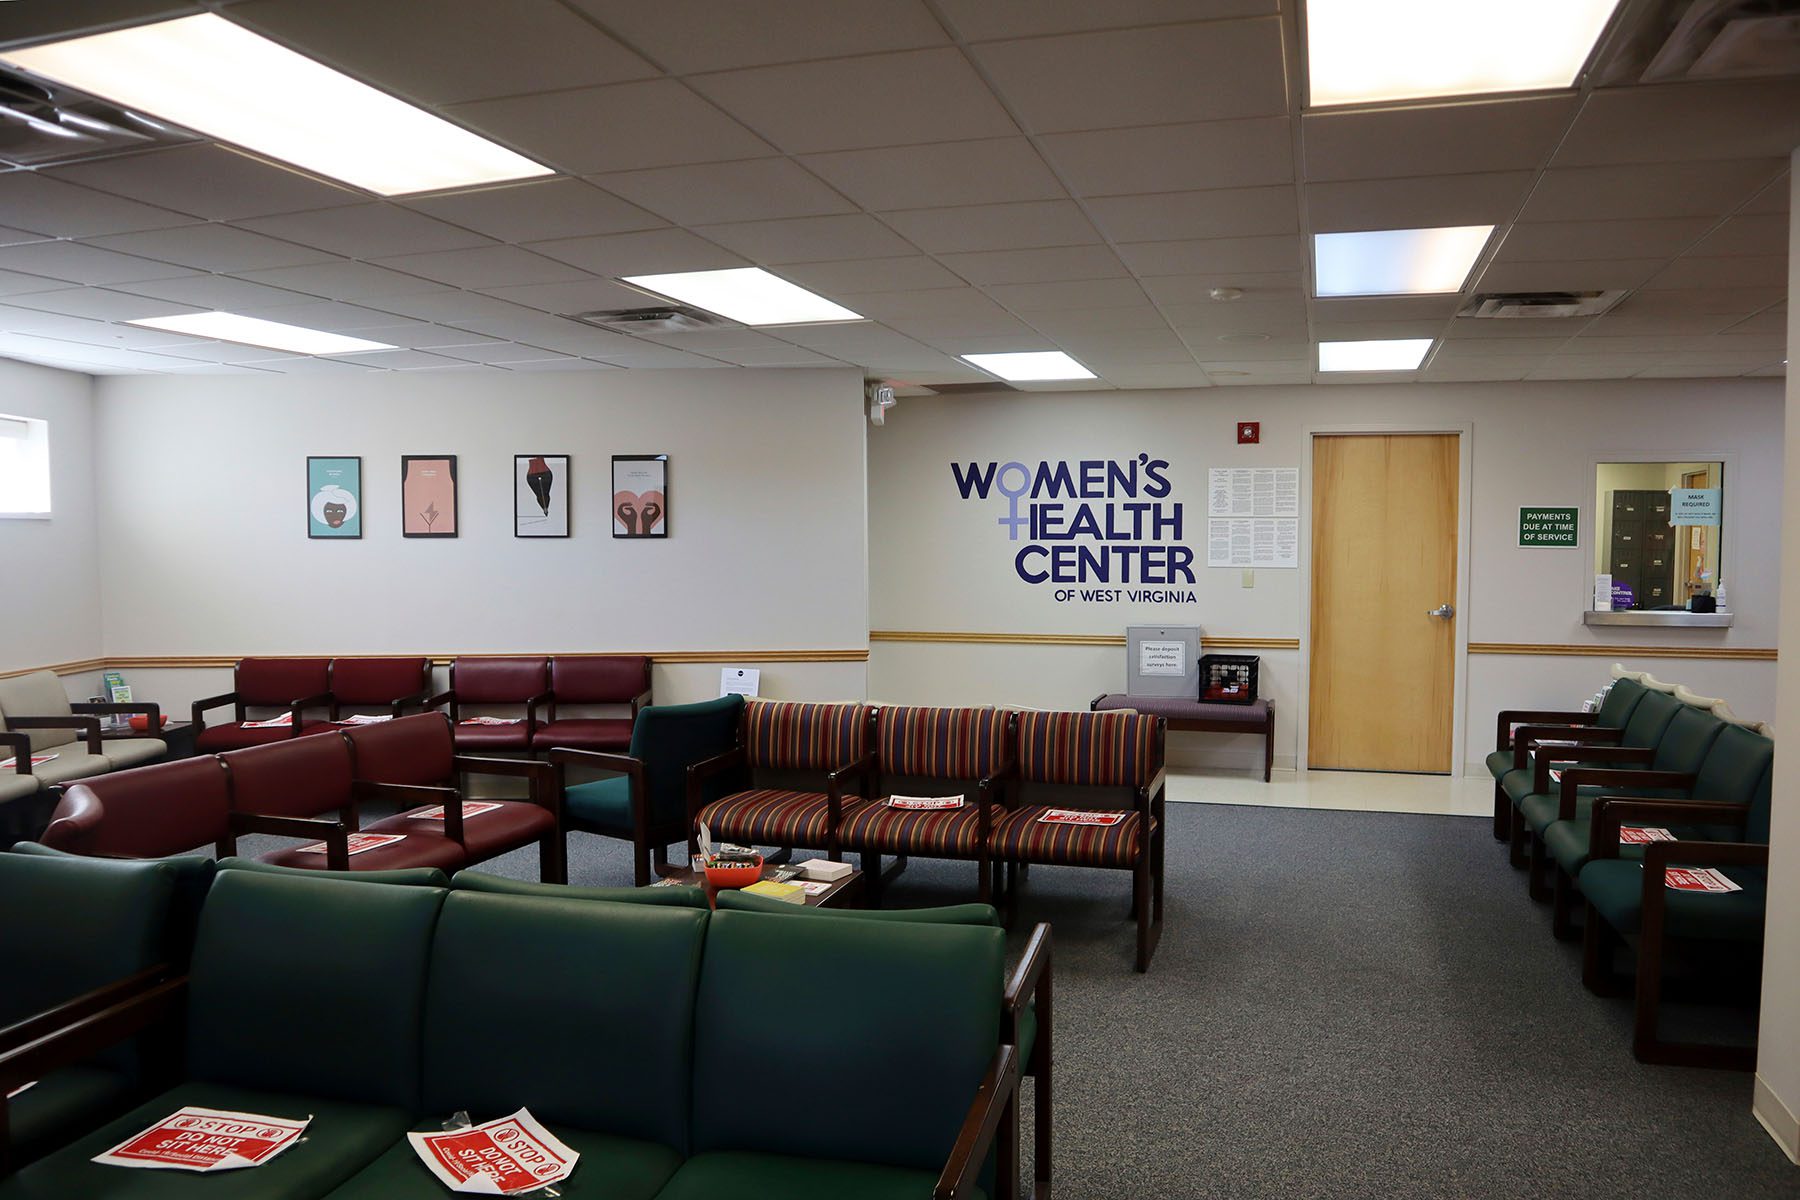 The waiting room of the Women's Health Center of West Virginia in Charleston, West Virginia sits empty.